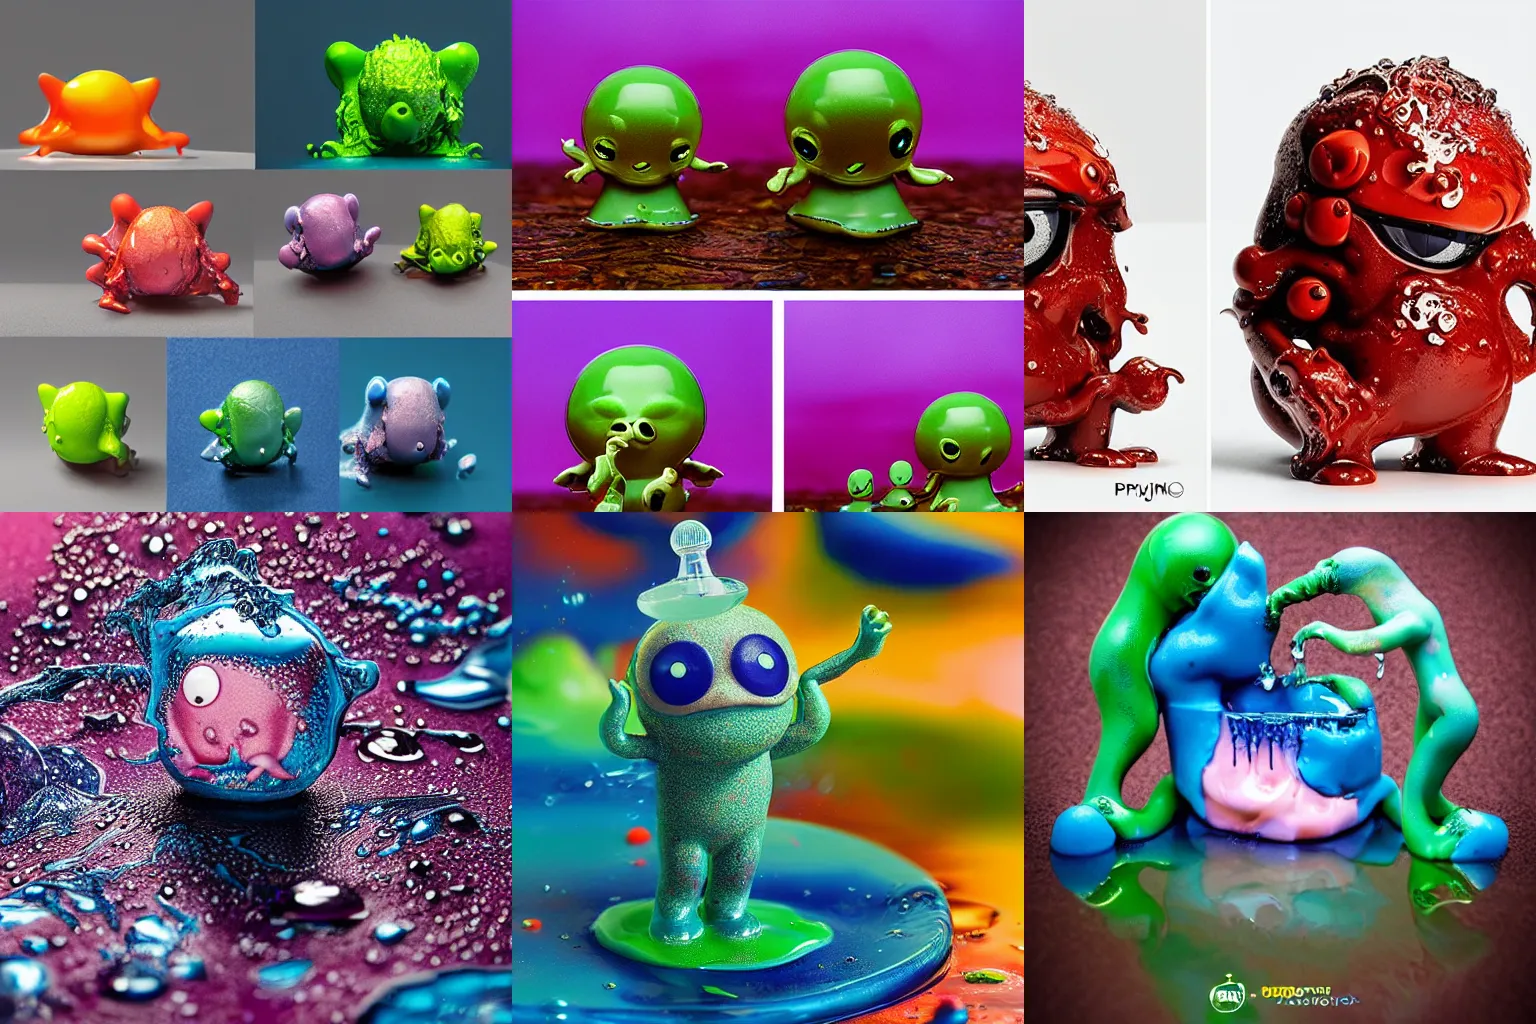 Prompt: splashy glossy melted ebay product, reaction diffusion, drops, drips, beautiful cute, cute melting miniature resine action figure, High detail photography, 8K, 3d fractals, cute pictoplasma, one simple ceramic tintoy melting plastic, melting, melting swampmonster Figure sculpture, 3d primitives, in a Studio hollow, by pixar, by chris mars, by jason edmiston, cgsociety, houdini, zbrush, zbrush simulation